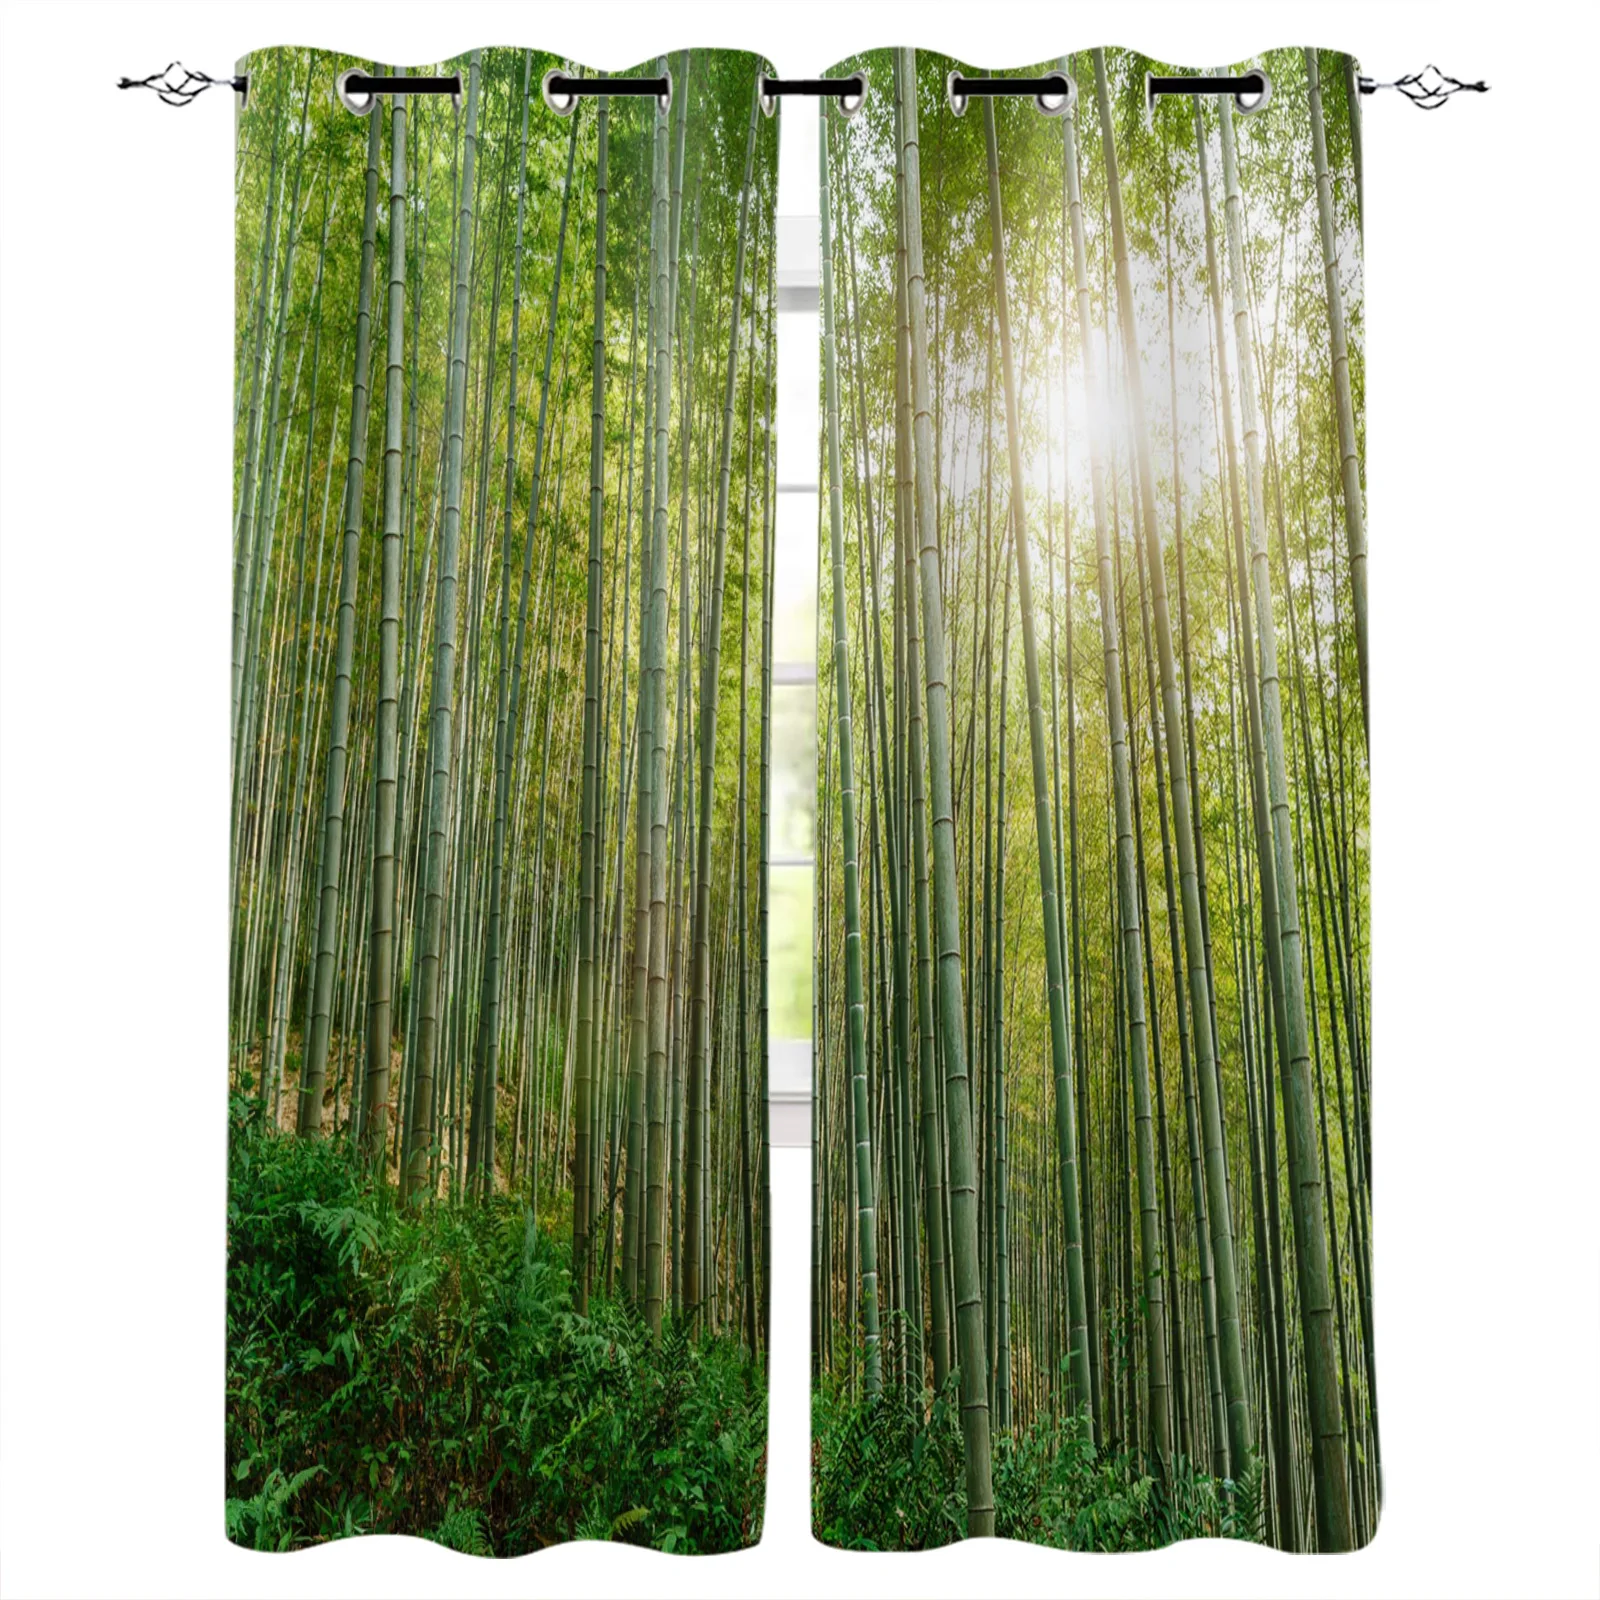 

Green Bamboo Forest Sunlight Summer Blackout Curtains Window Curtains For Bedroom Living Room Decor Window Treatments